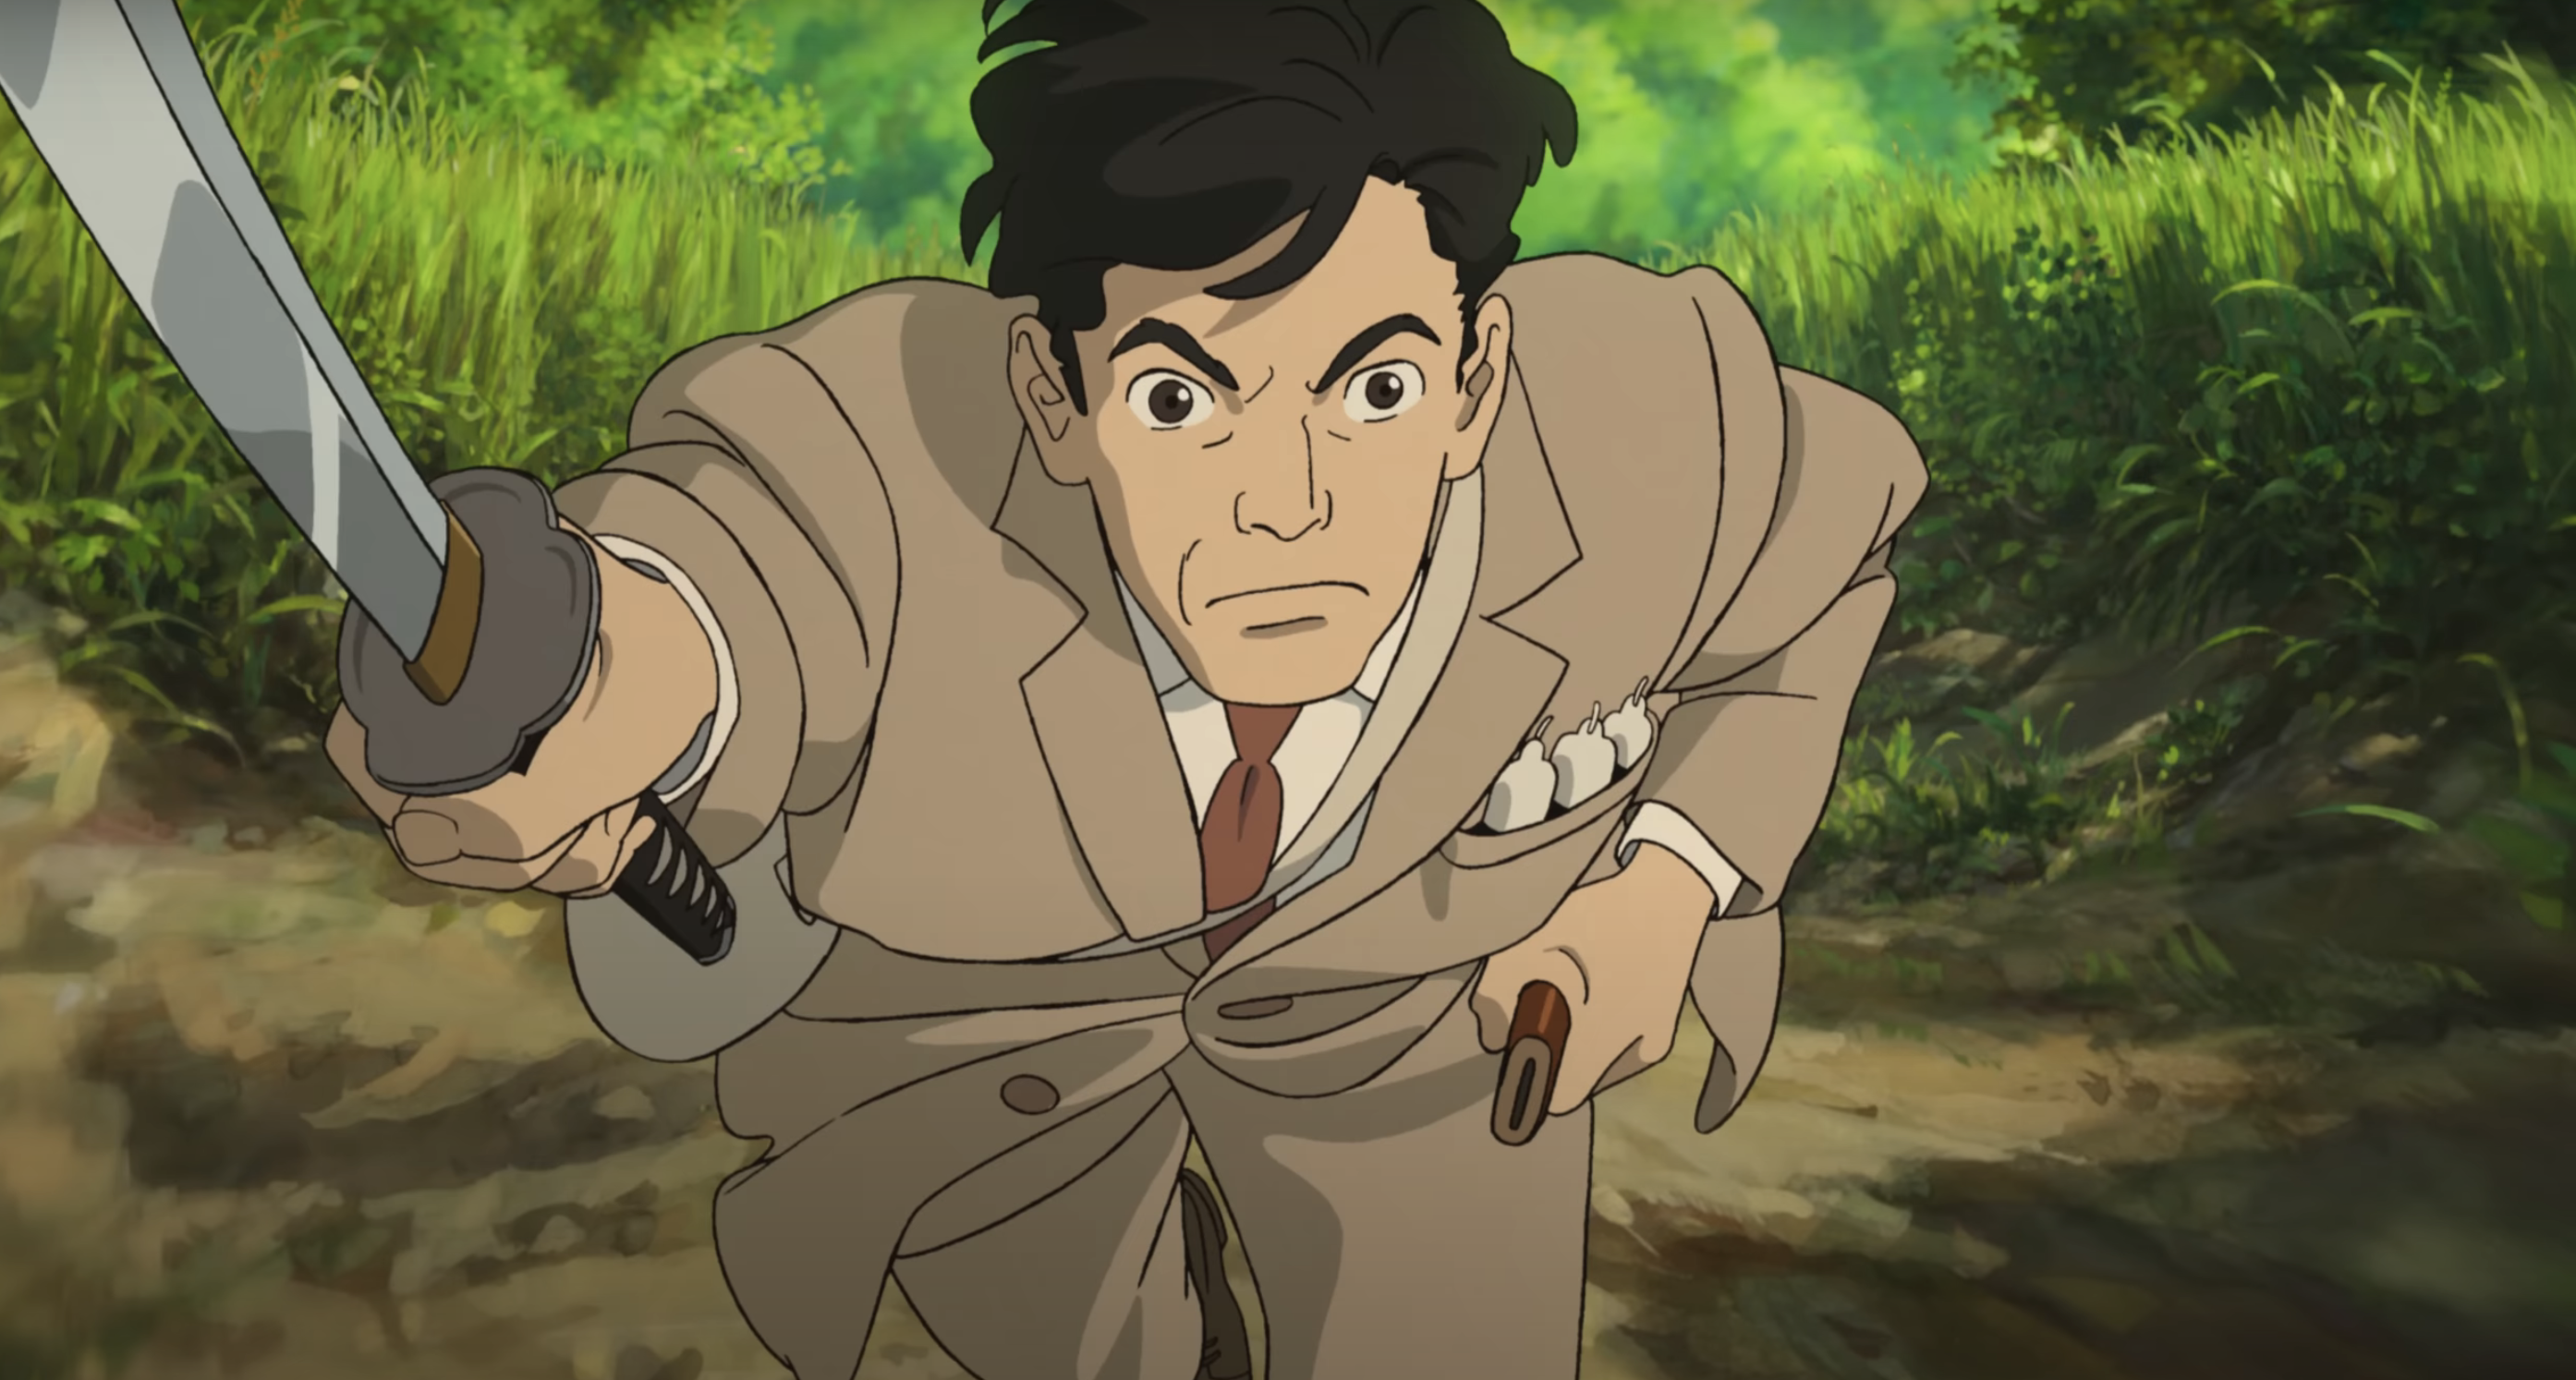 his father in a suit running with a sword outside